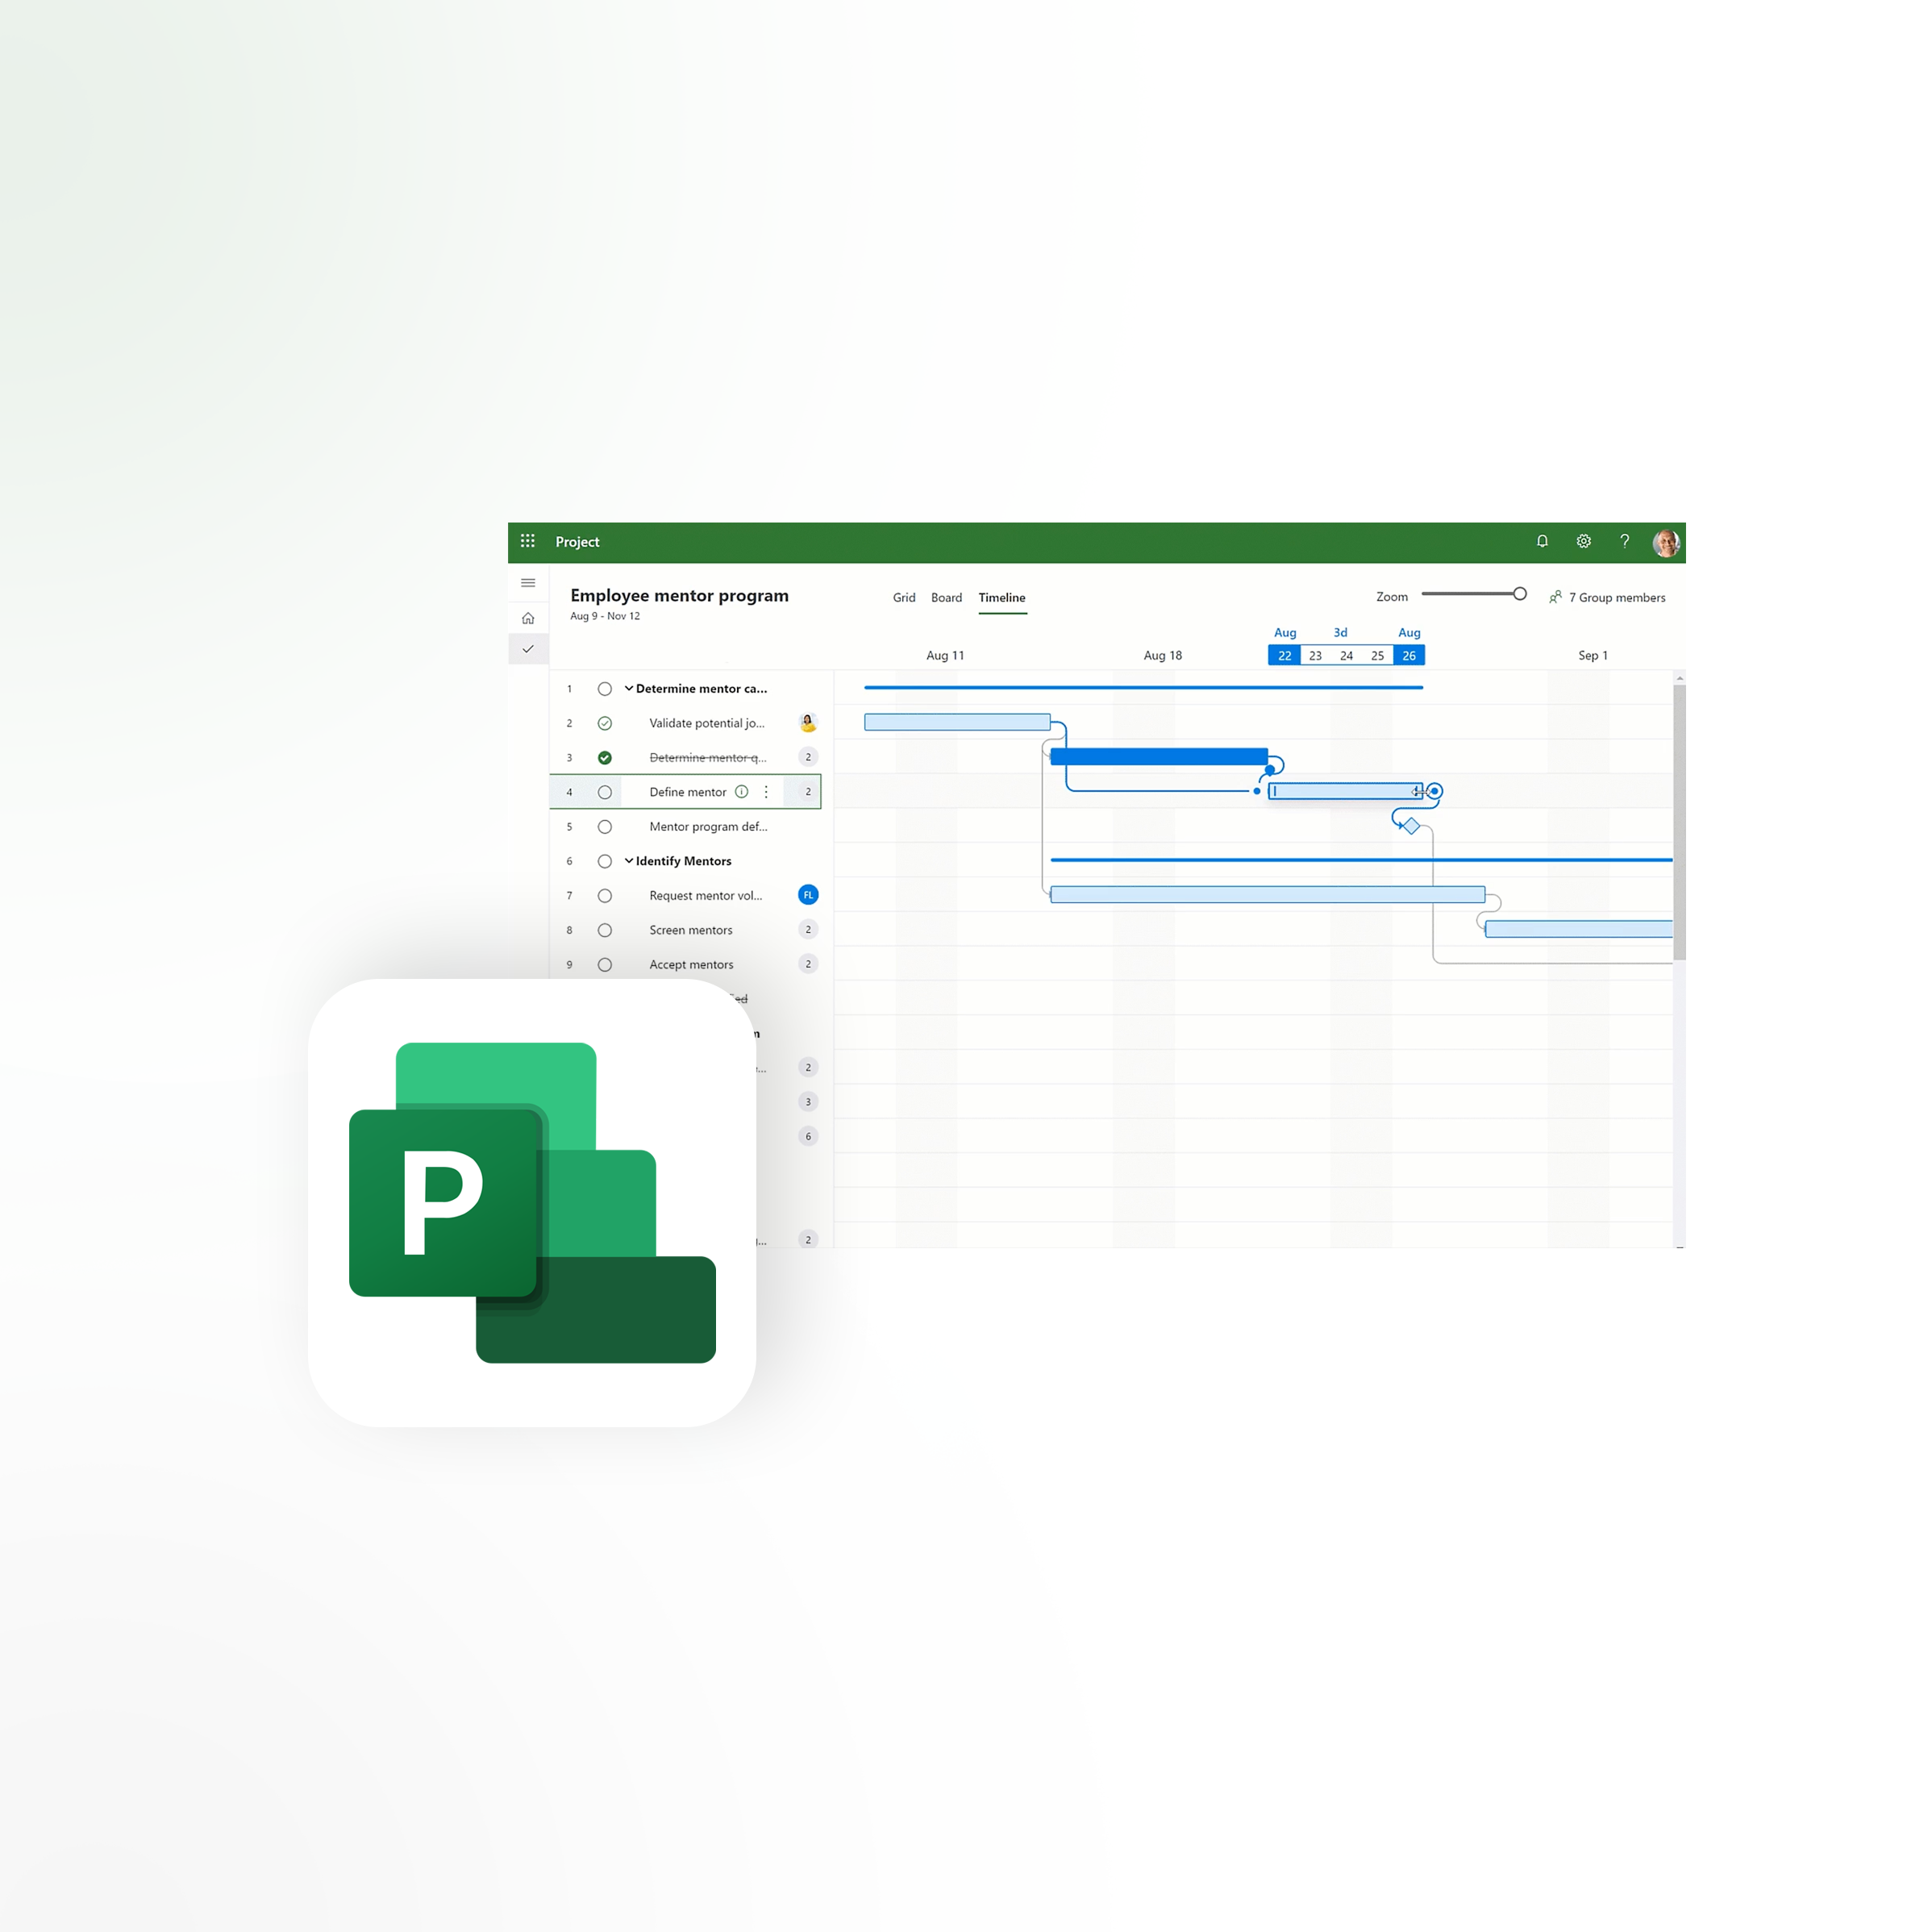 What is Microsoft Project? What is it used for? Where can I download it?